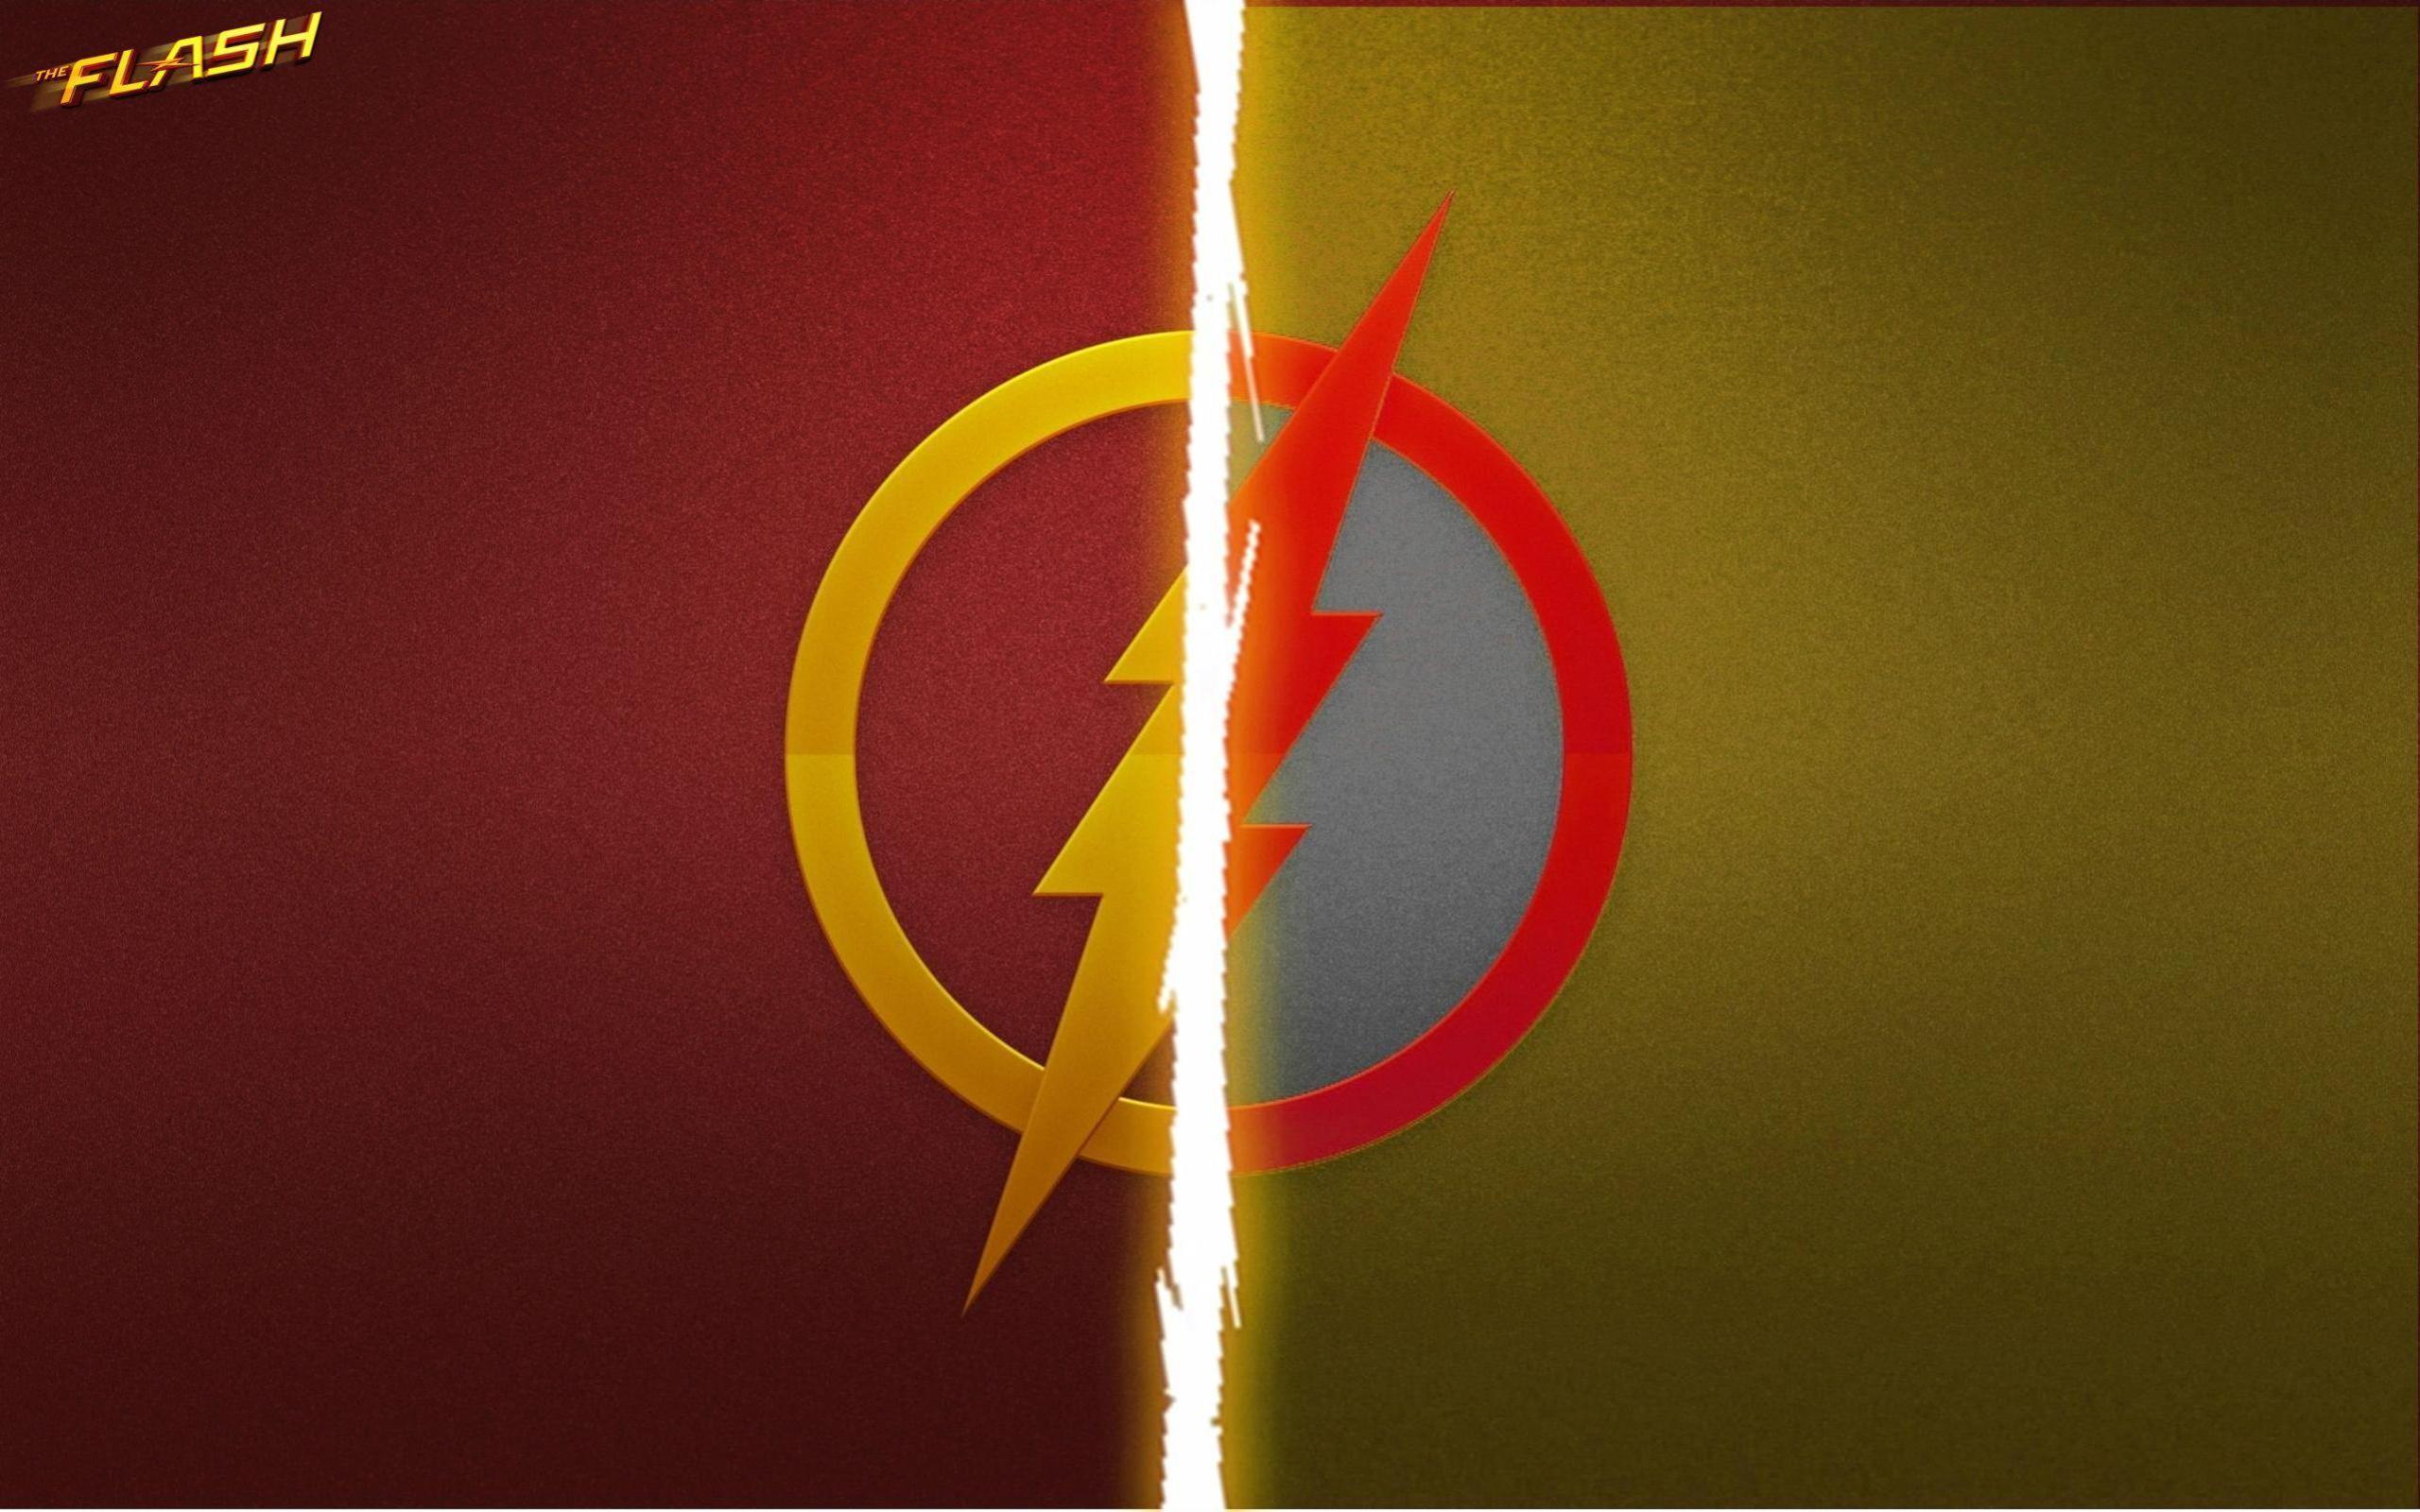 The Flash Wallpaper Made